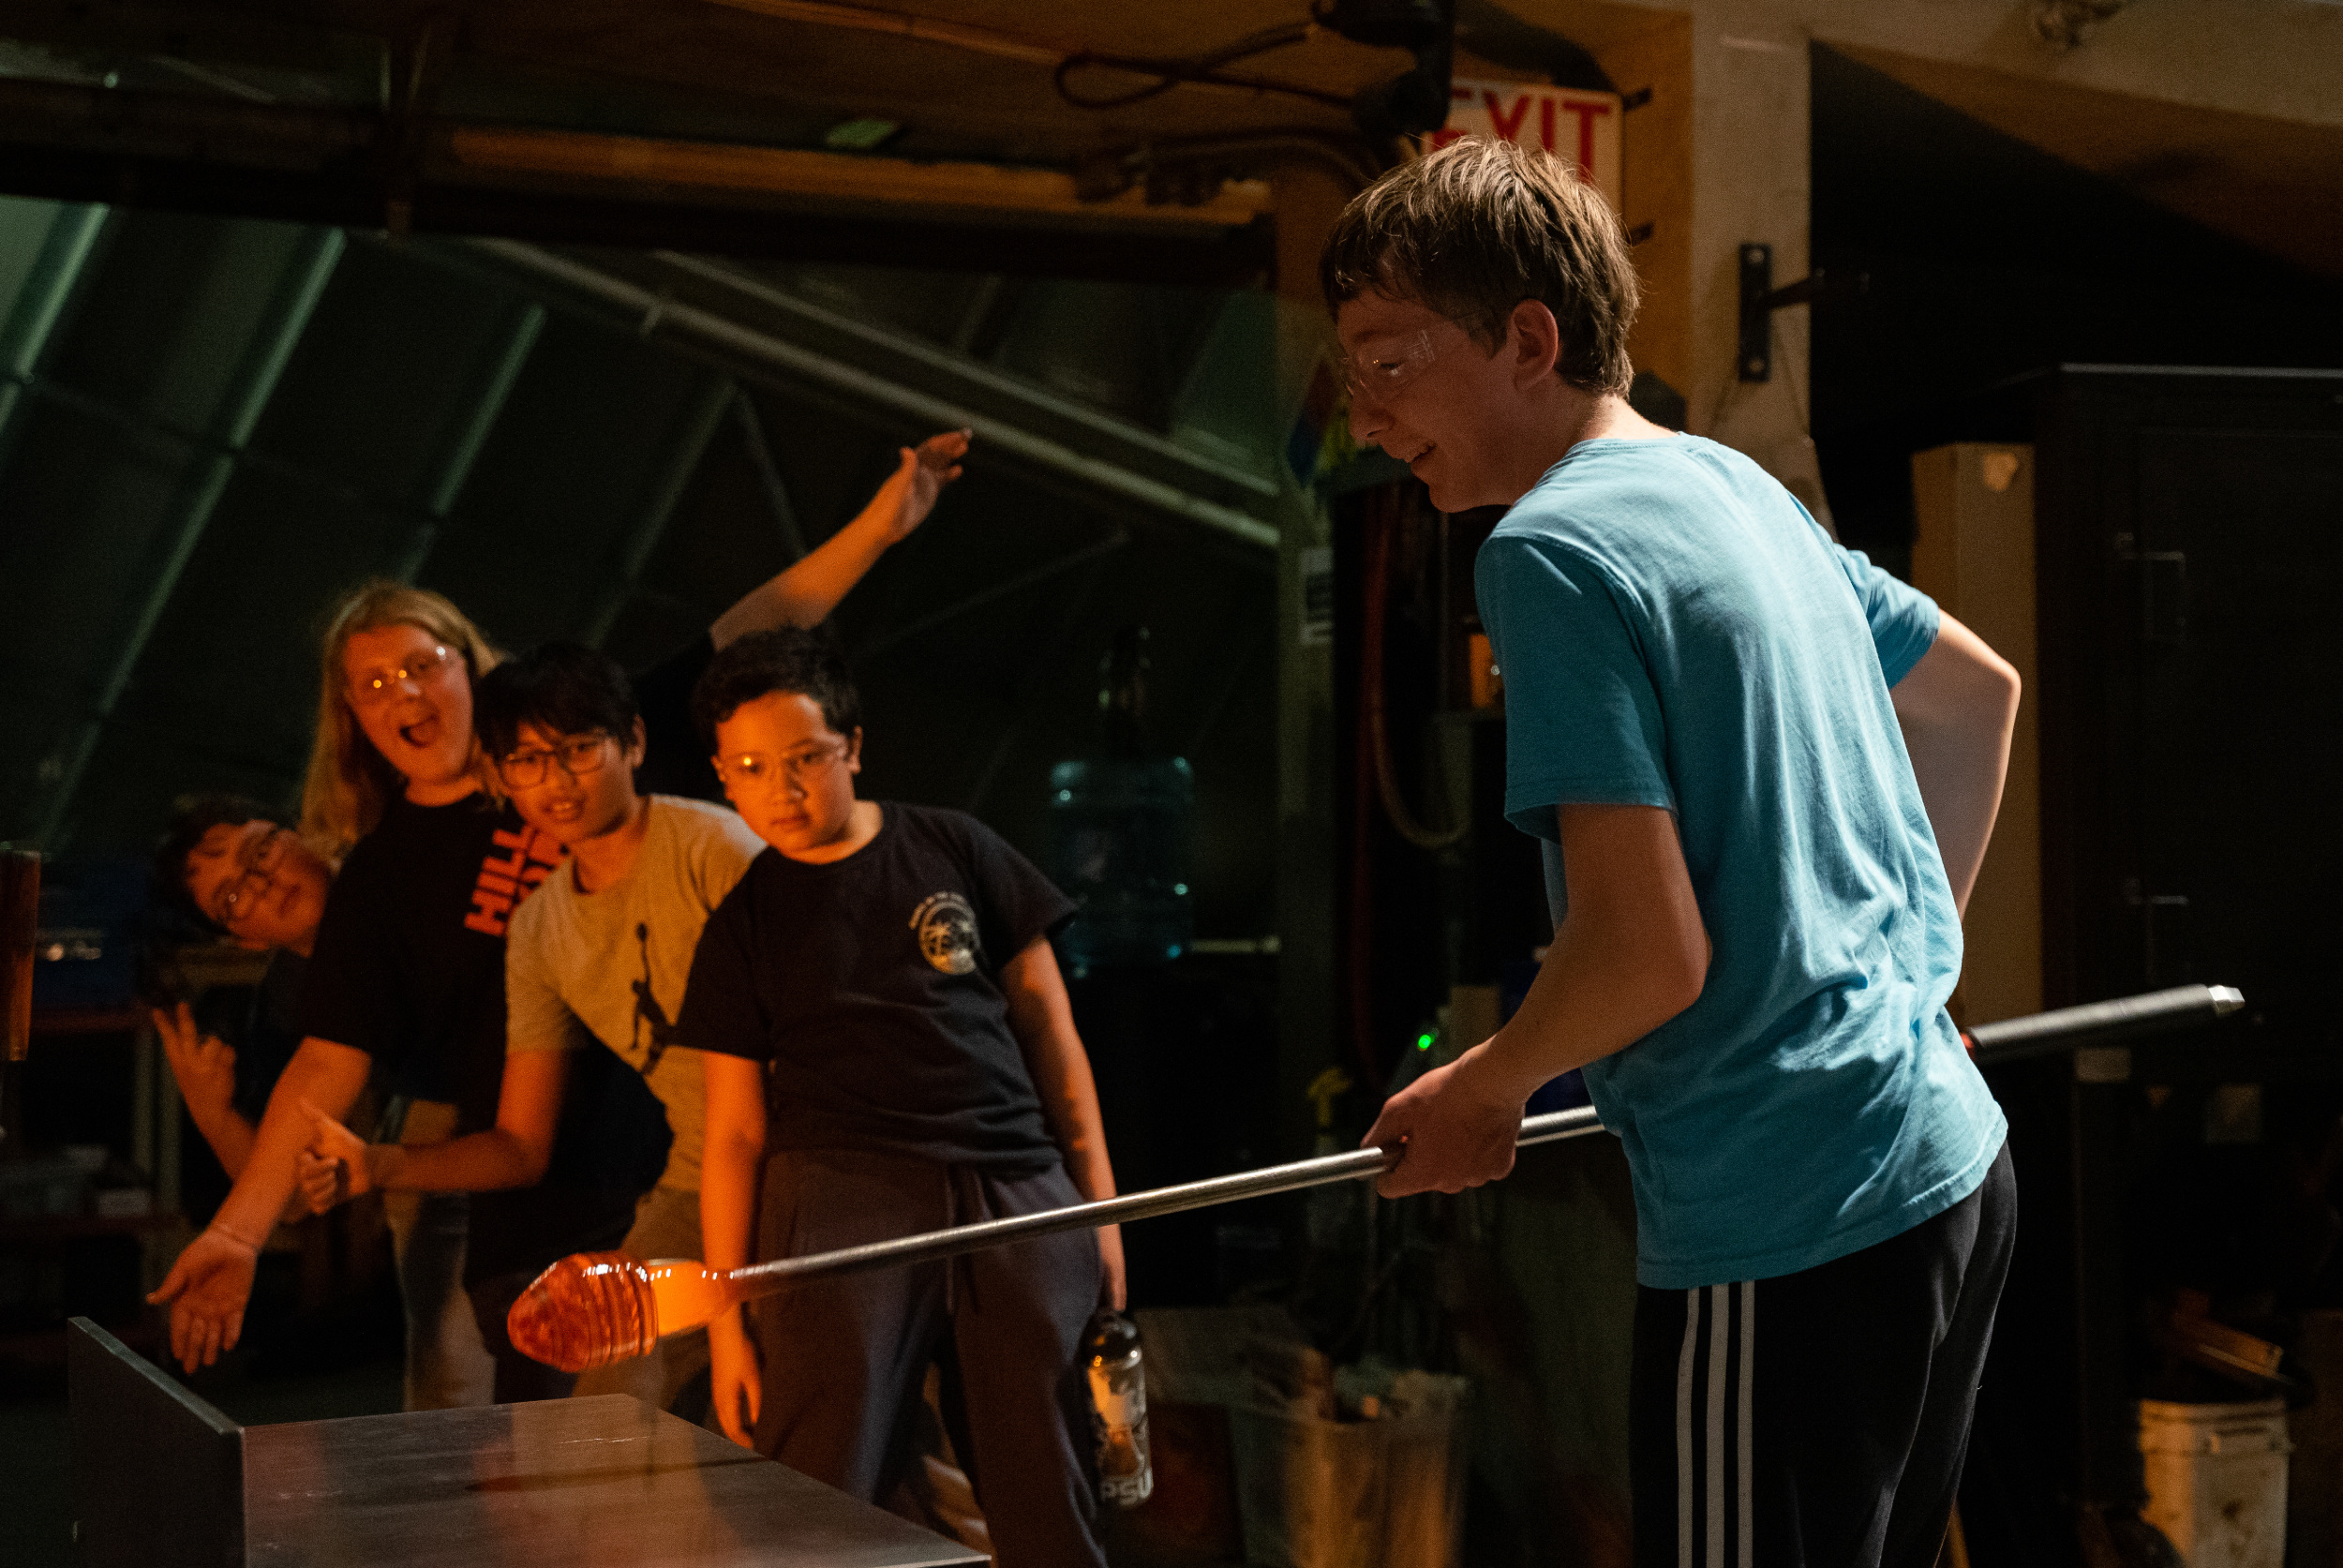 Color Photo Of Hilltop Artists Students Posing In The Hot Shop At The Museum Of Glass.